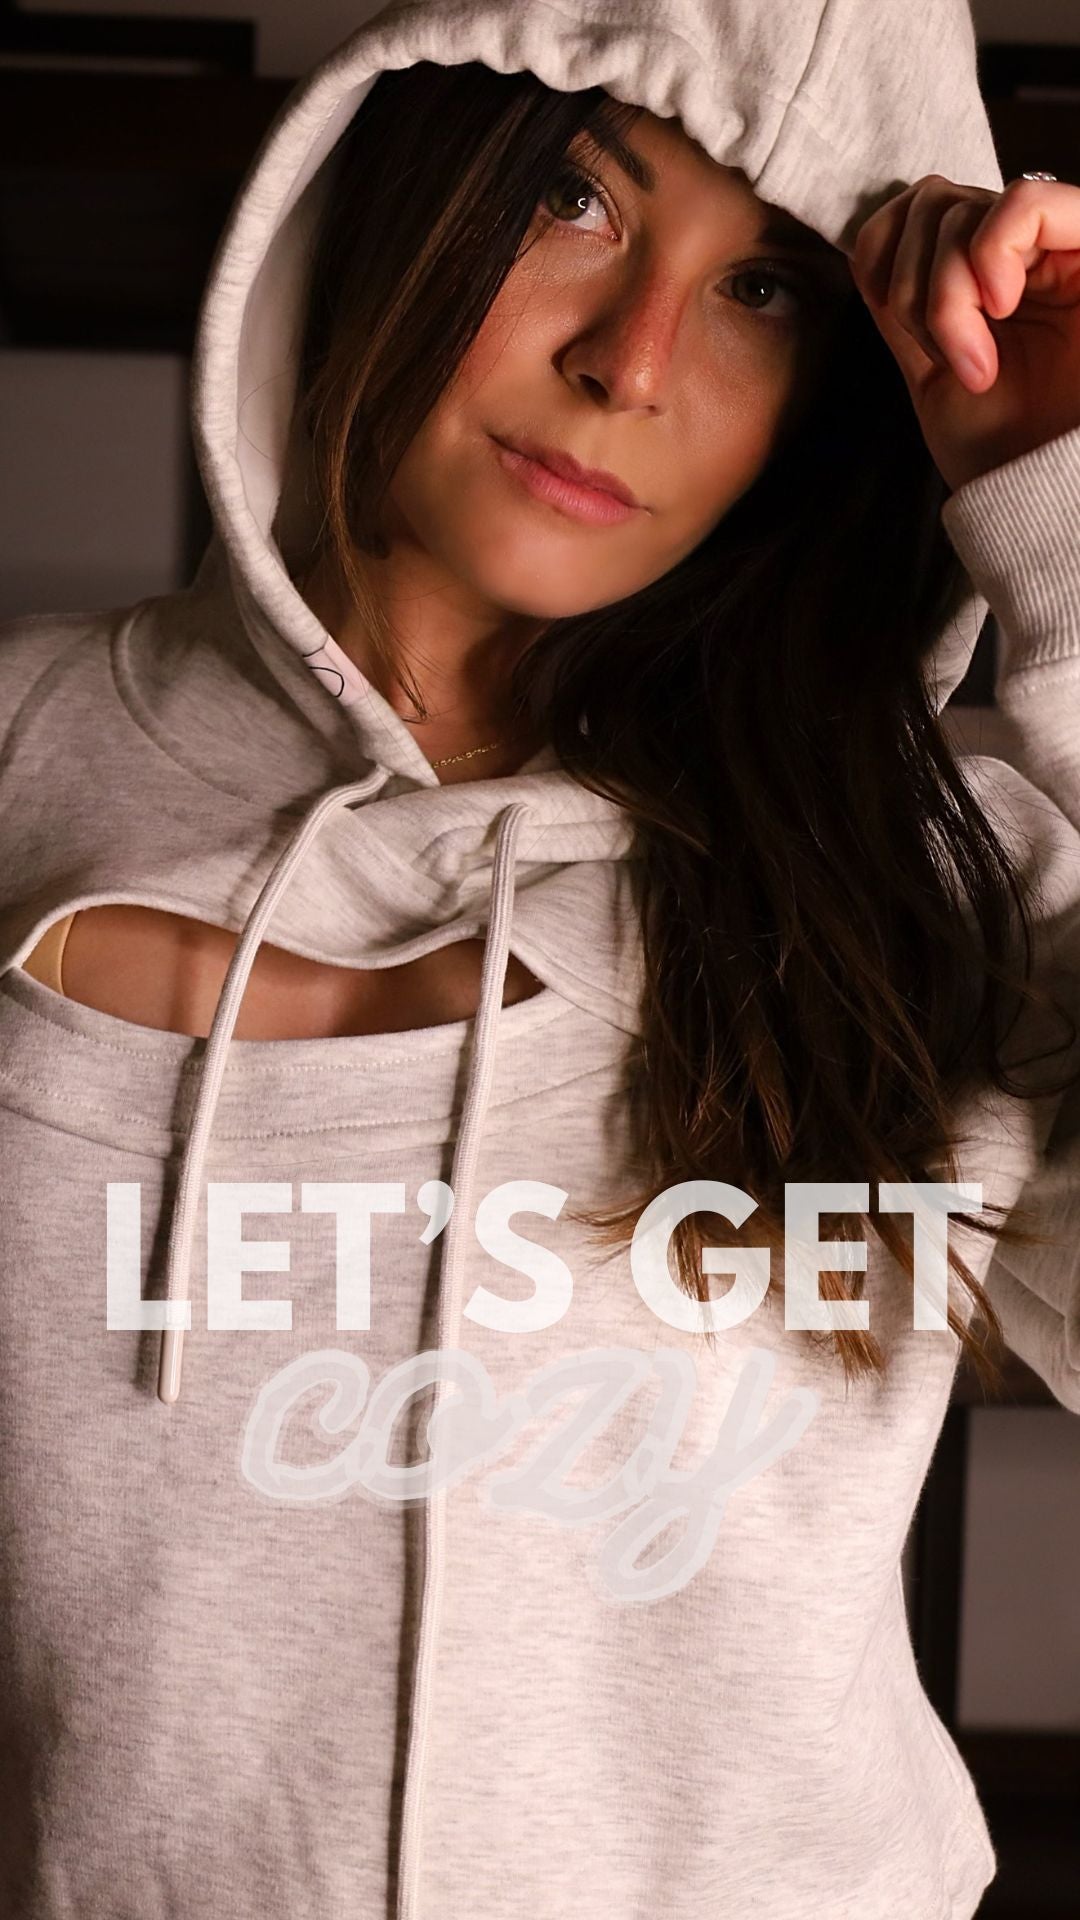 The image features a woman pulling the hood of a light grey hoodie over her head, with the phrase "LET'S GET cozy" in white cursive lettering across the image. Her gaze is directed towards the camera, with a relaxed and comfortable expression that matches the cozy theme suggested by the hoodie and the overlaid text. The intimate and warm atmosphere of the photo invites viewers to embrace comfort and relaxation.